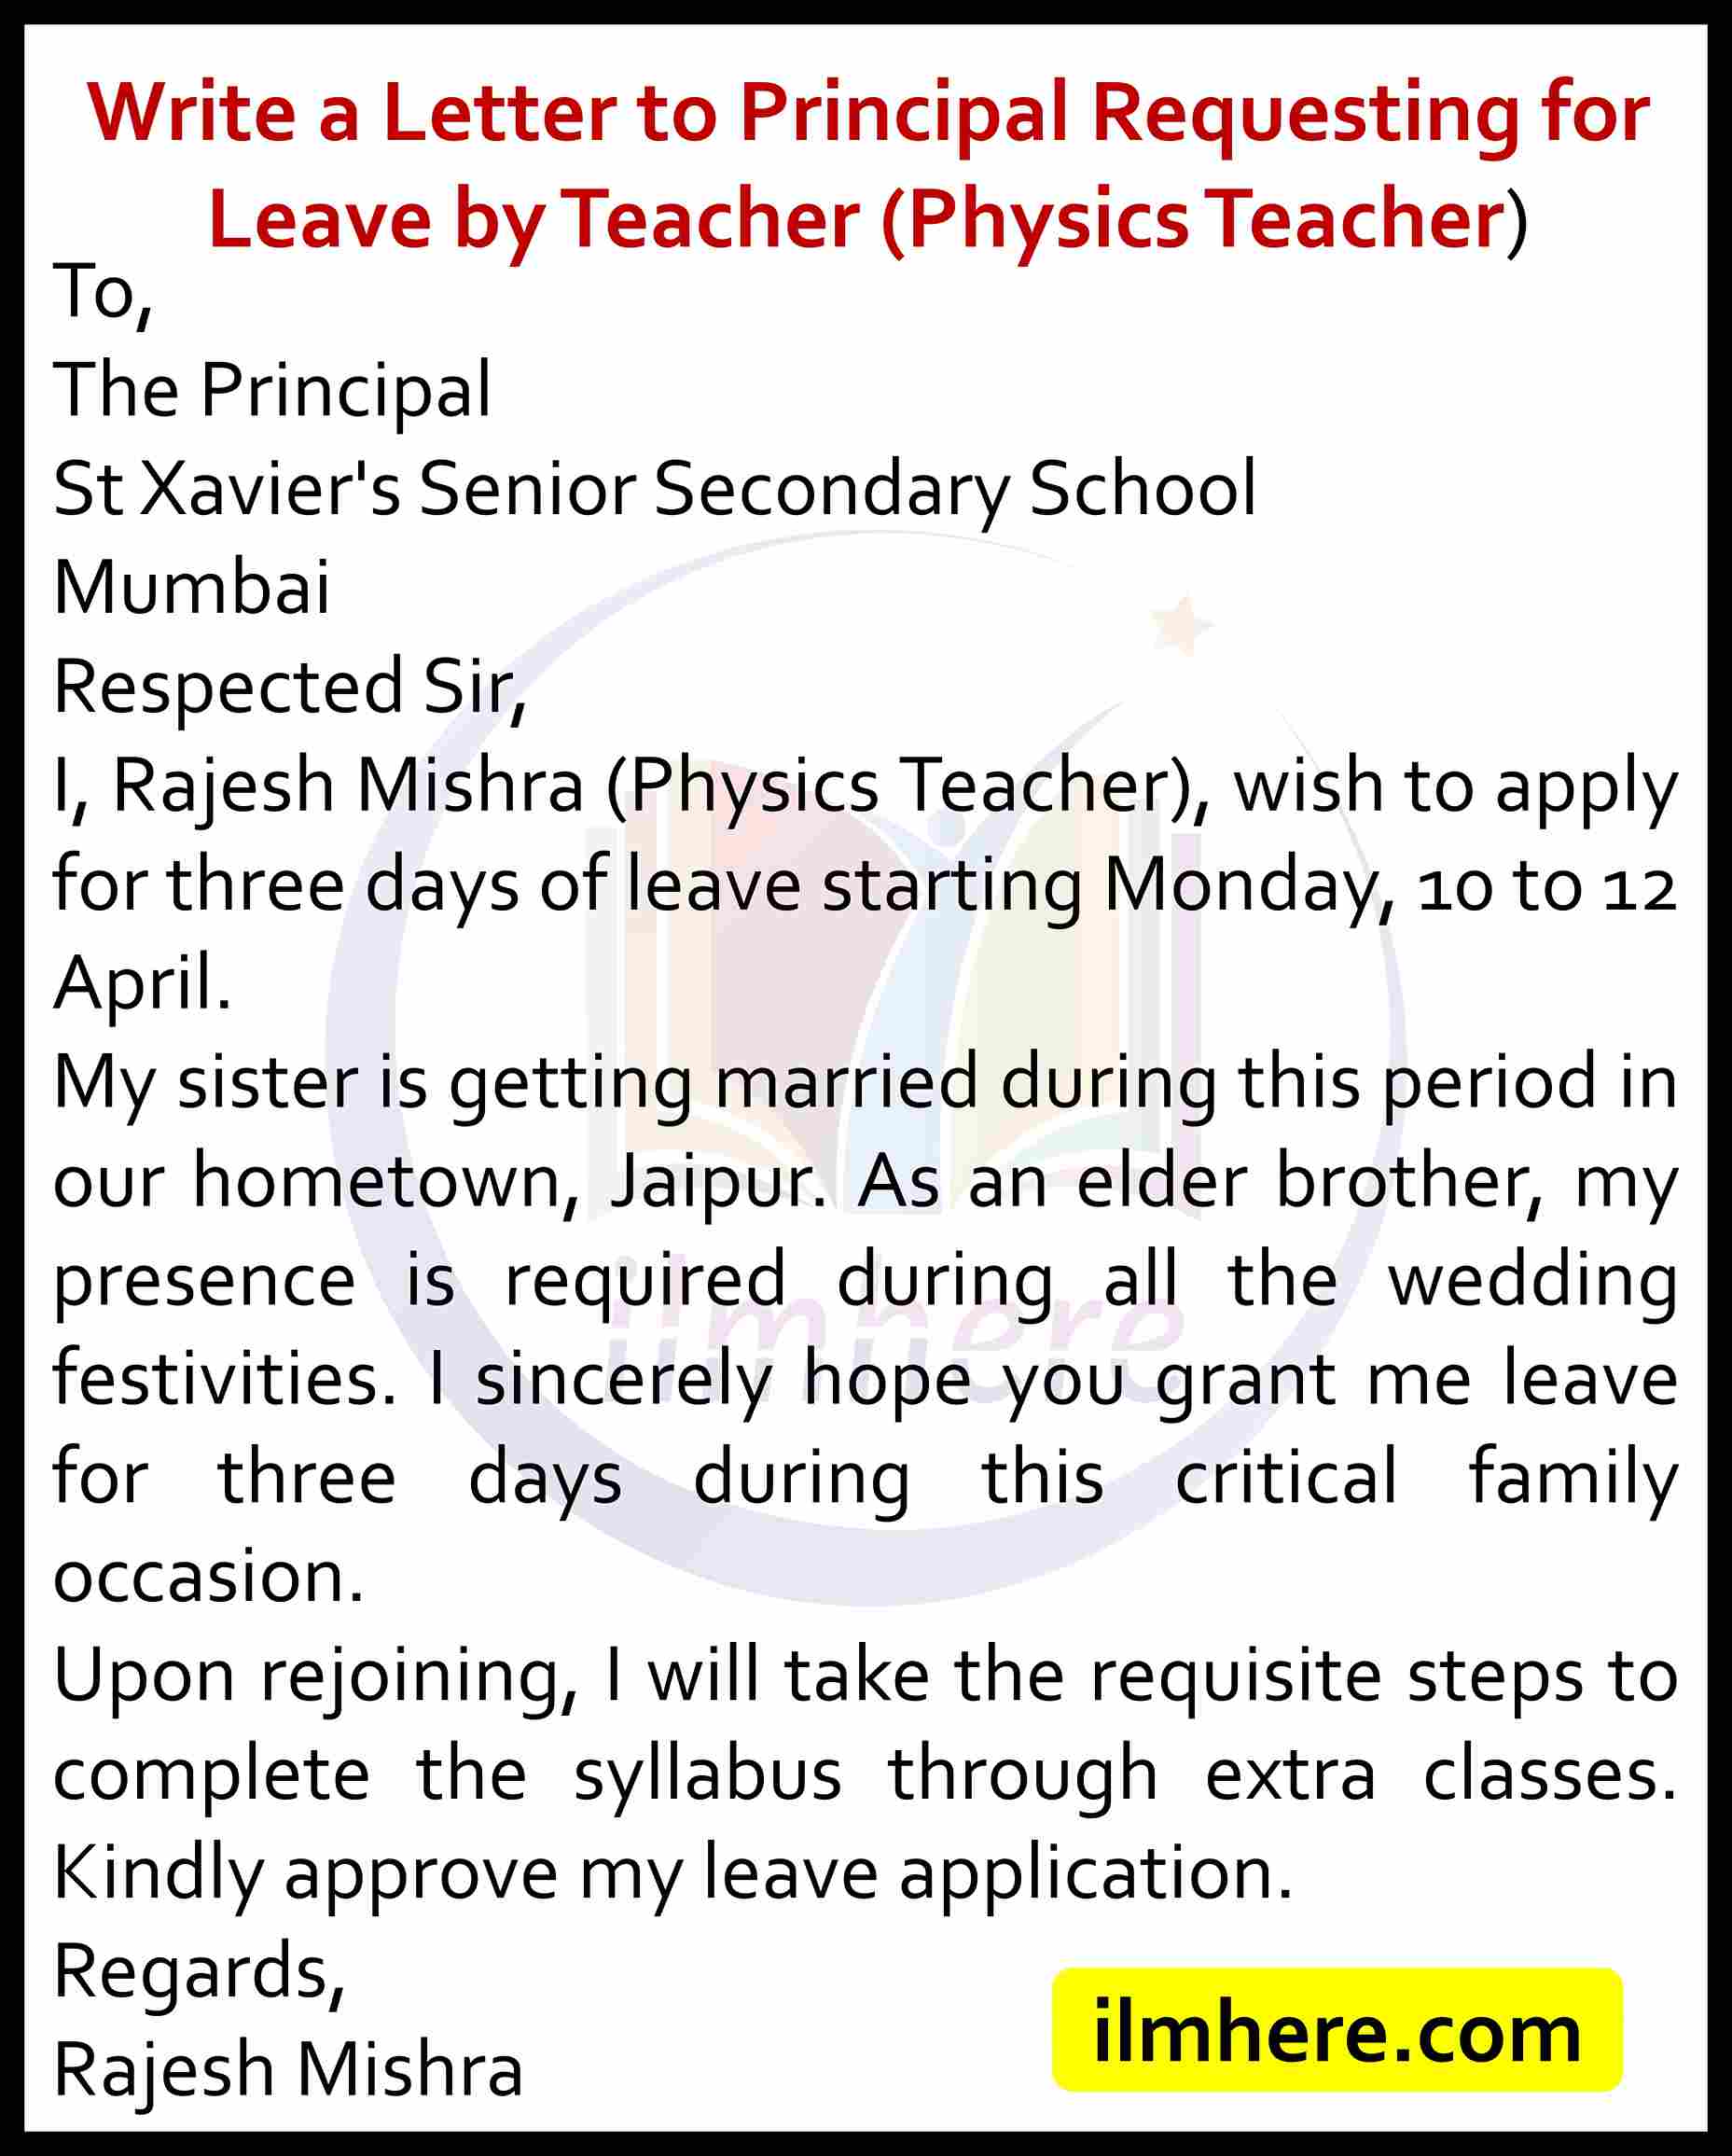 Write a Letter to Principal Requesting for Leave by Teacher (Physics Teacher)